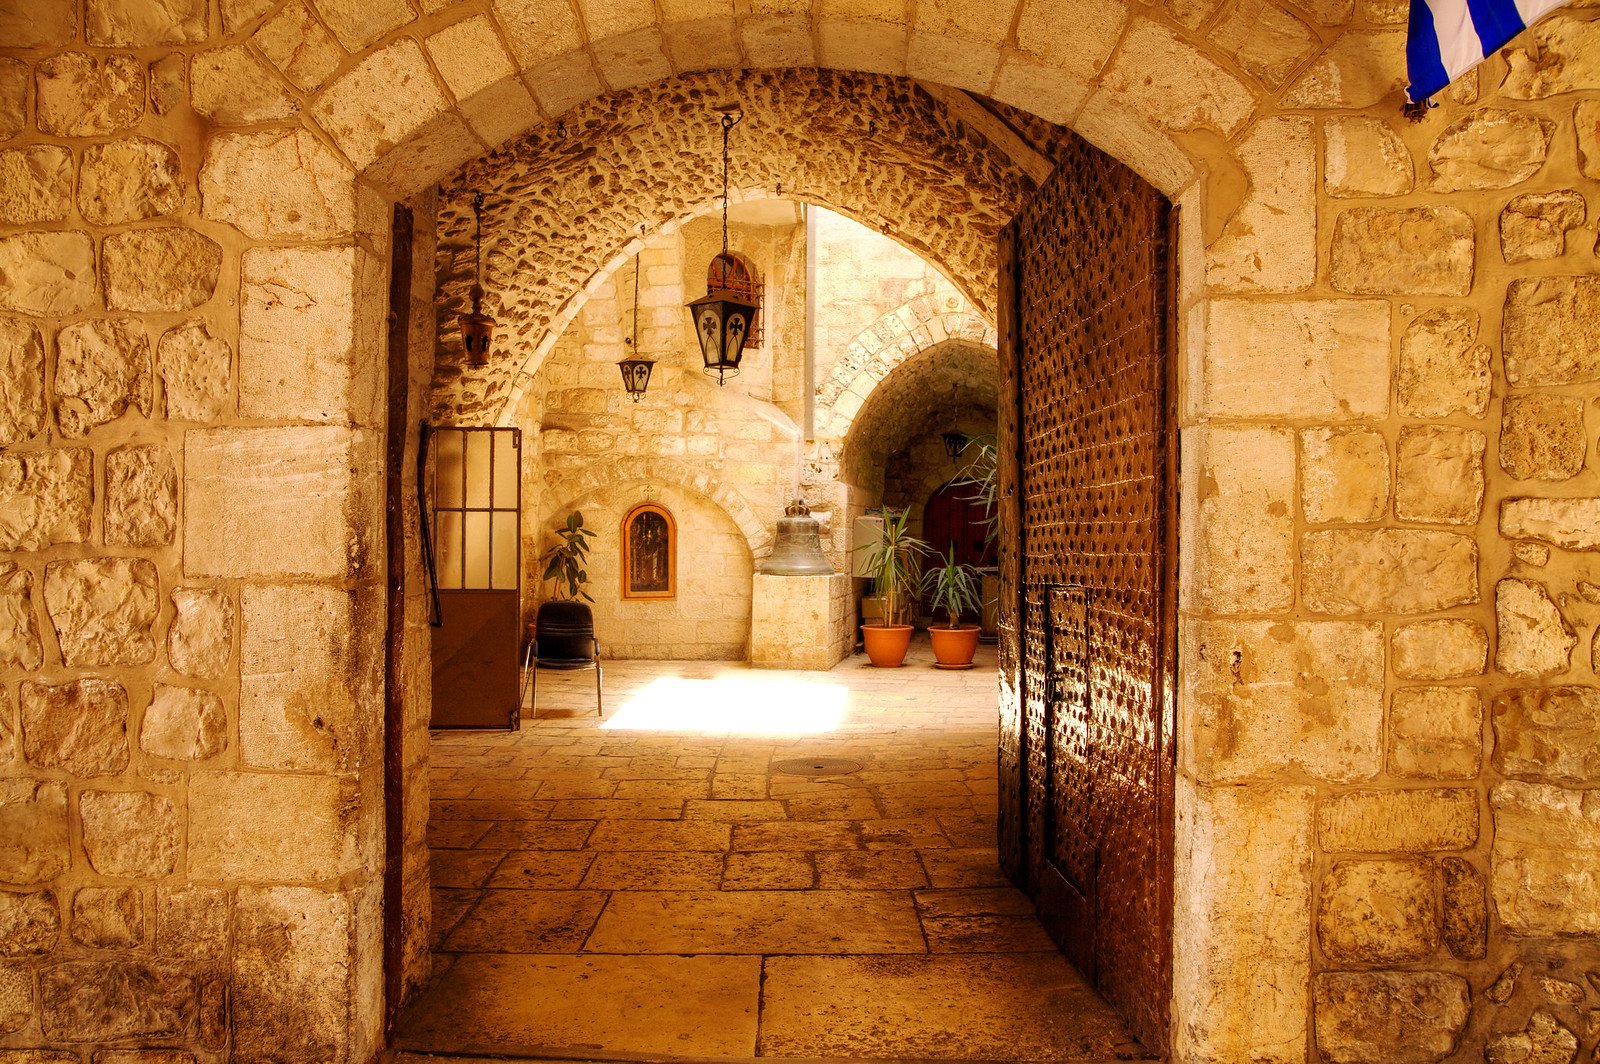 Renovated apartments for sale in the Old City of Jerusalem